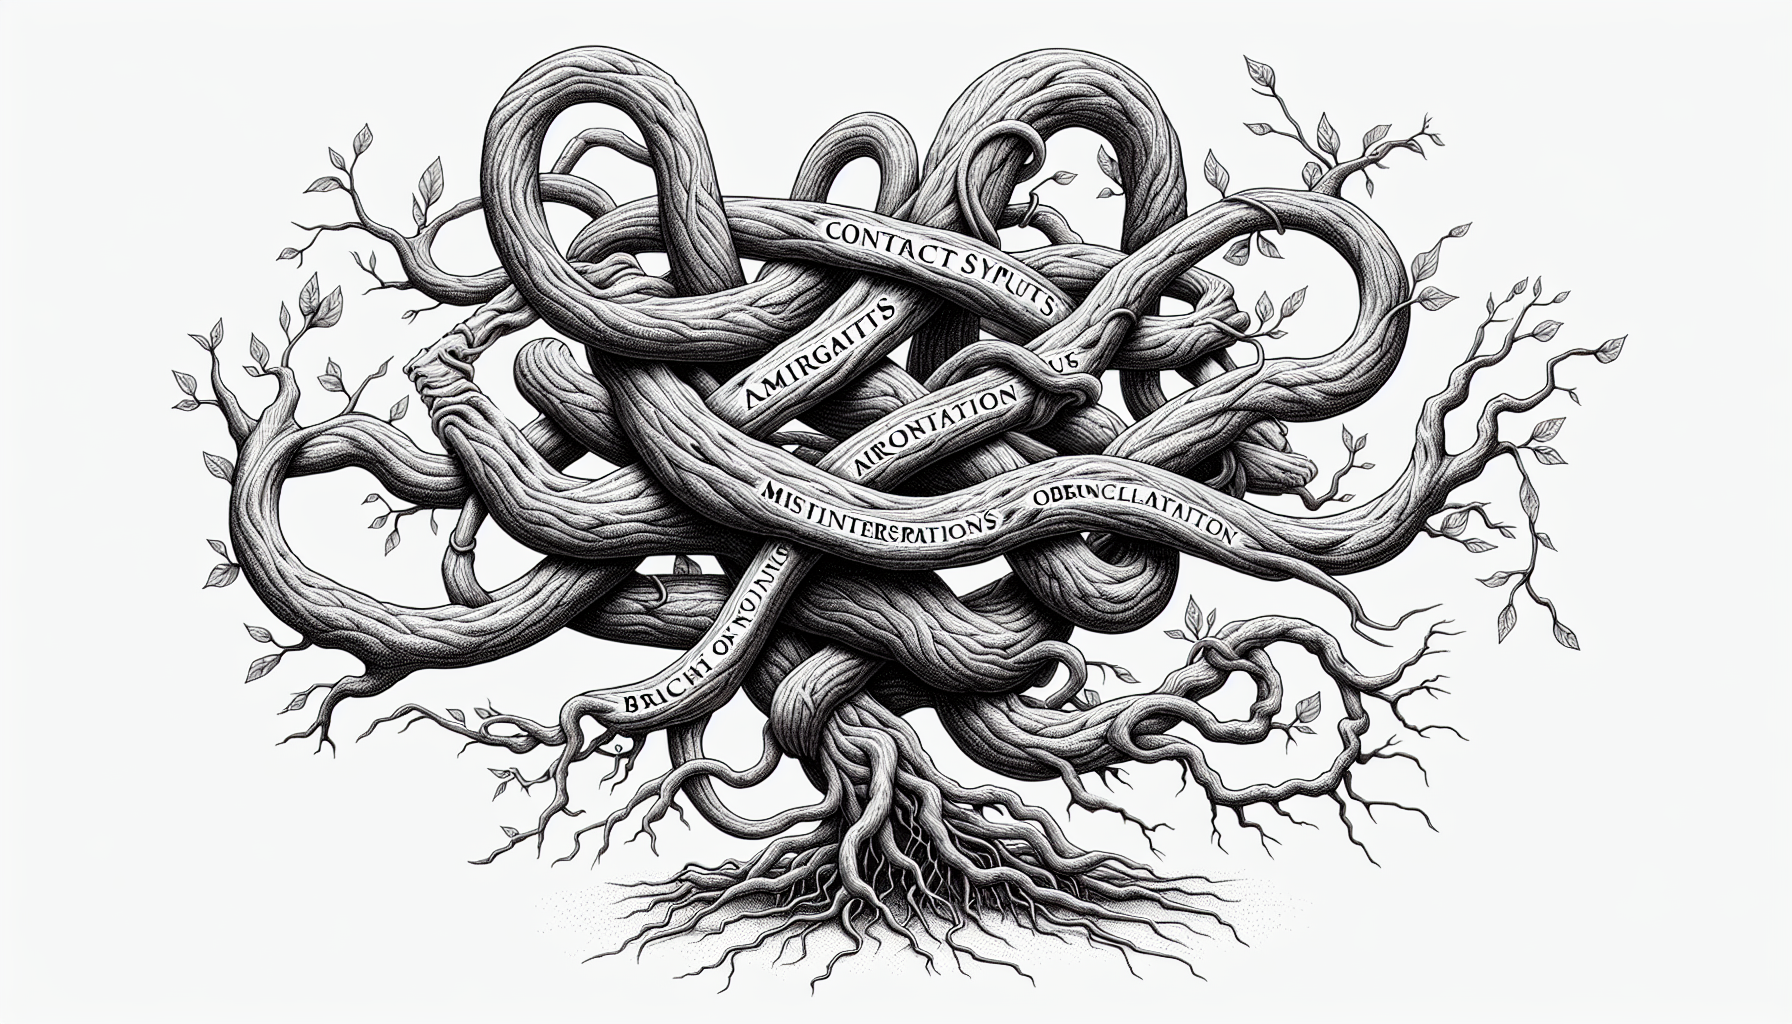 Illustration of a tangled knot representing contractual issues